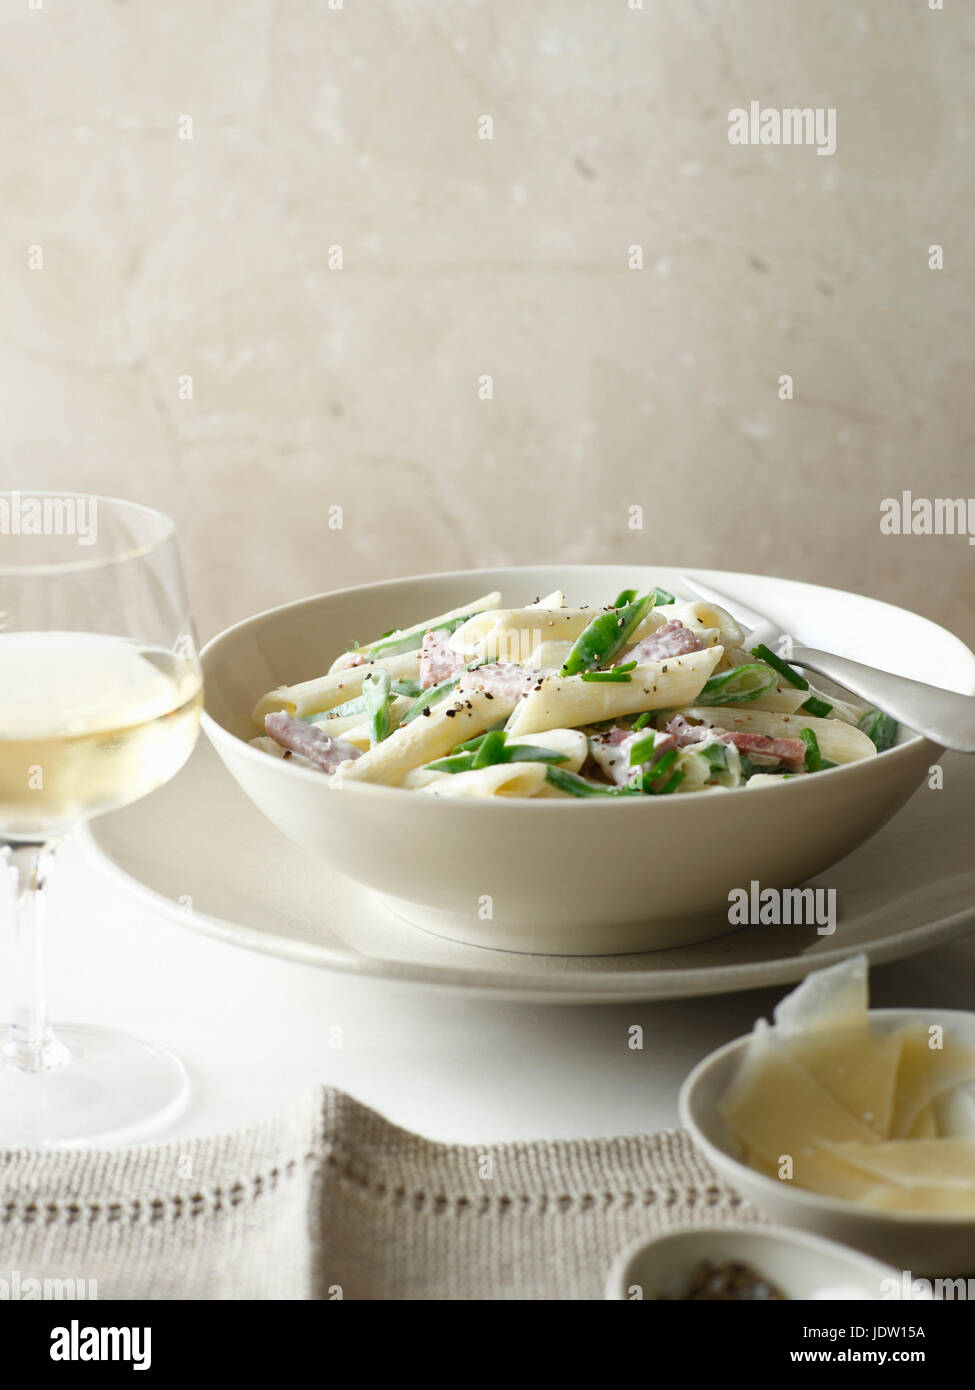 Bowl of pasta with vegetables Stock Photo